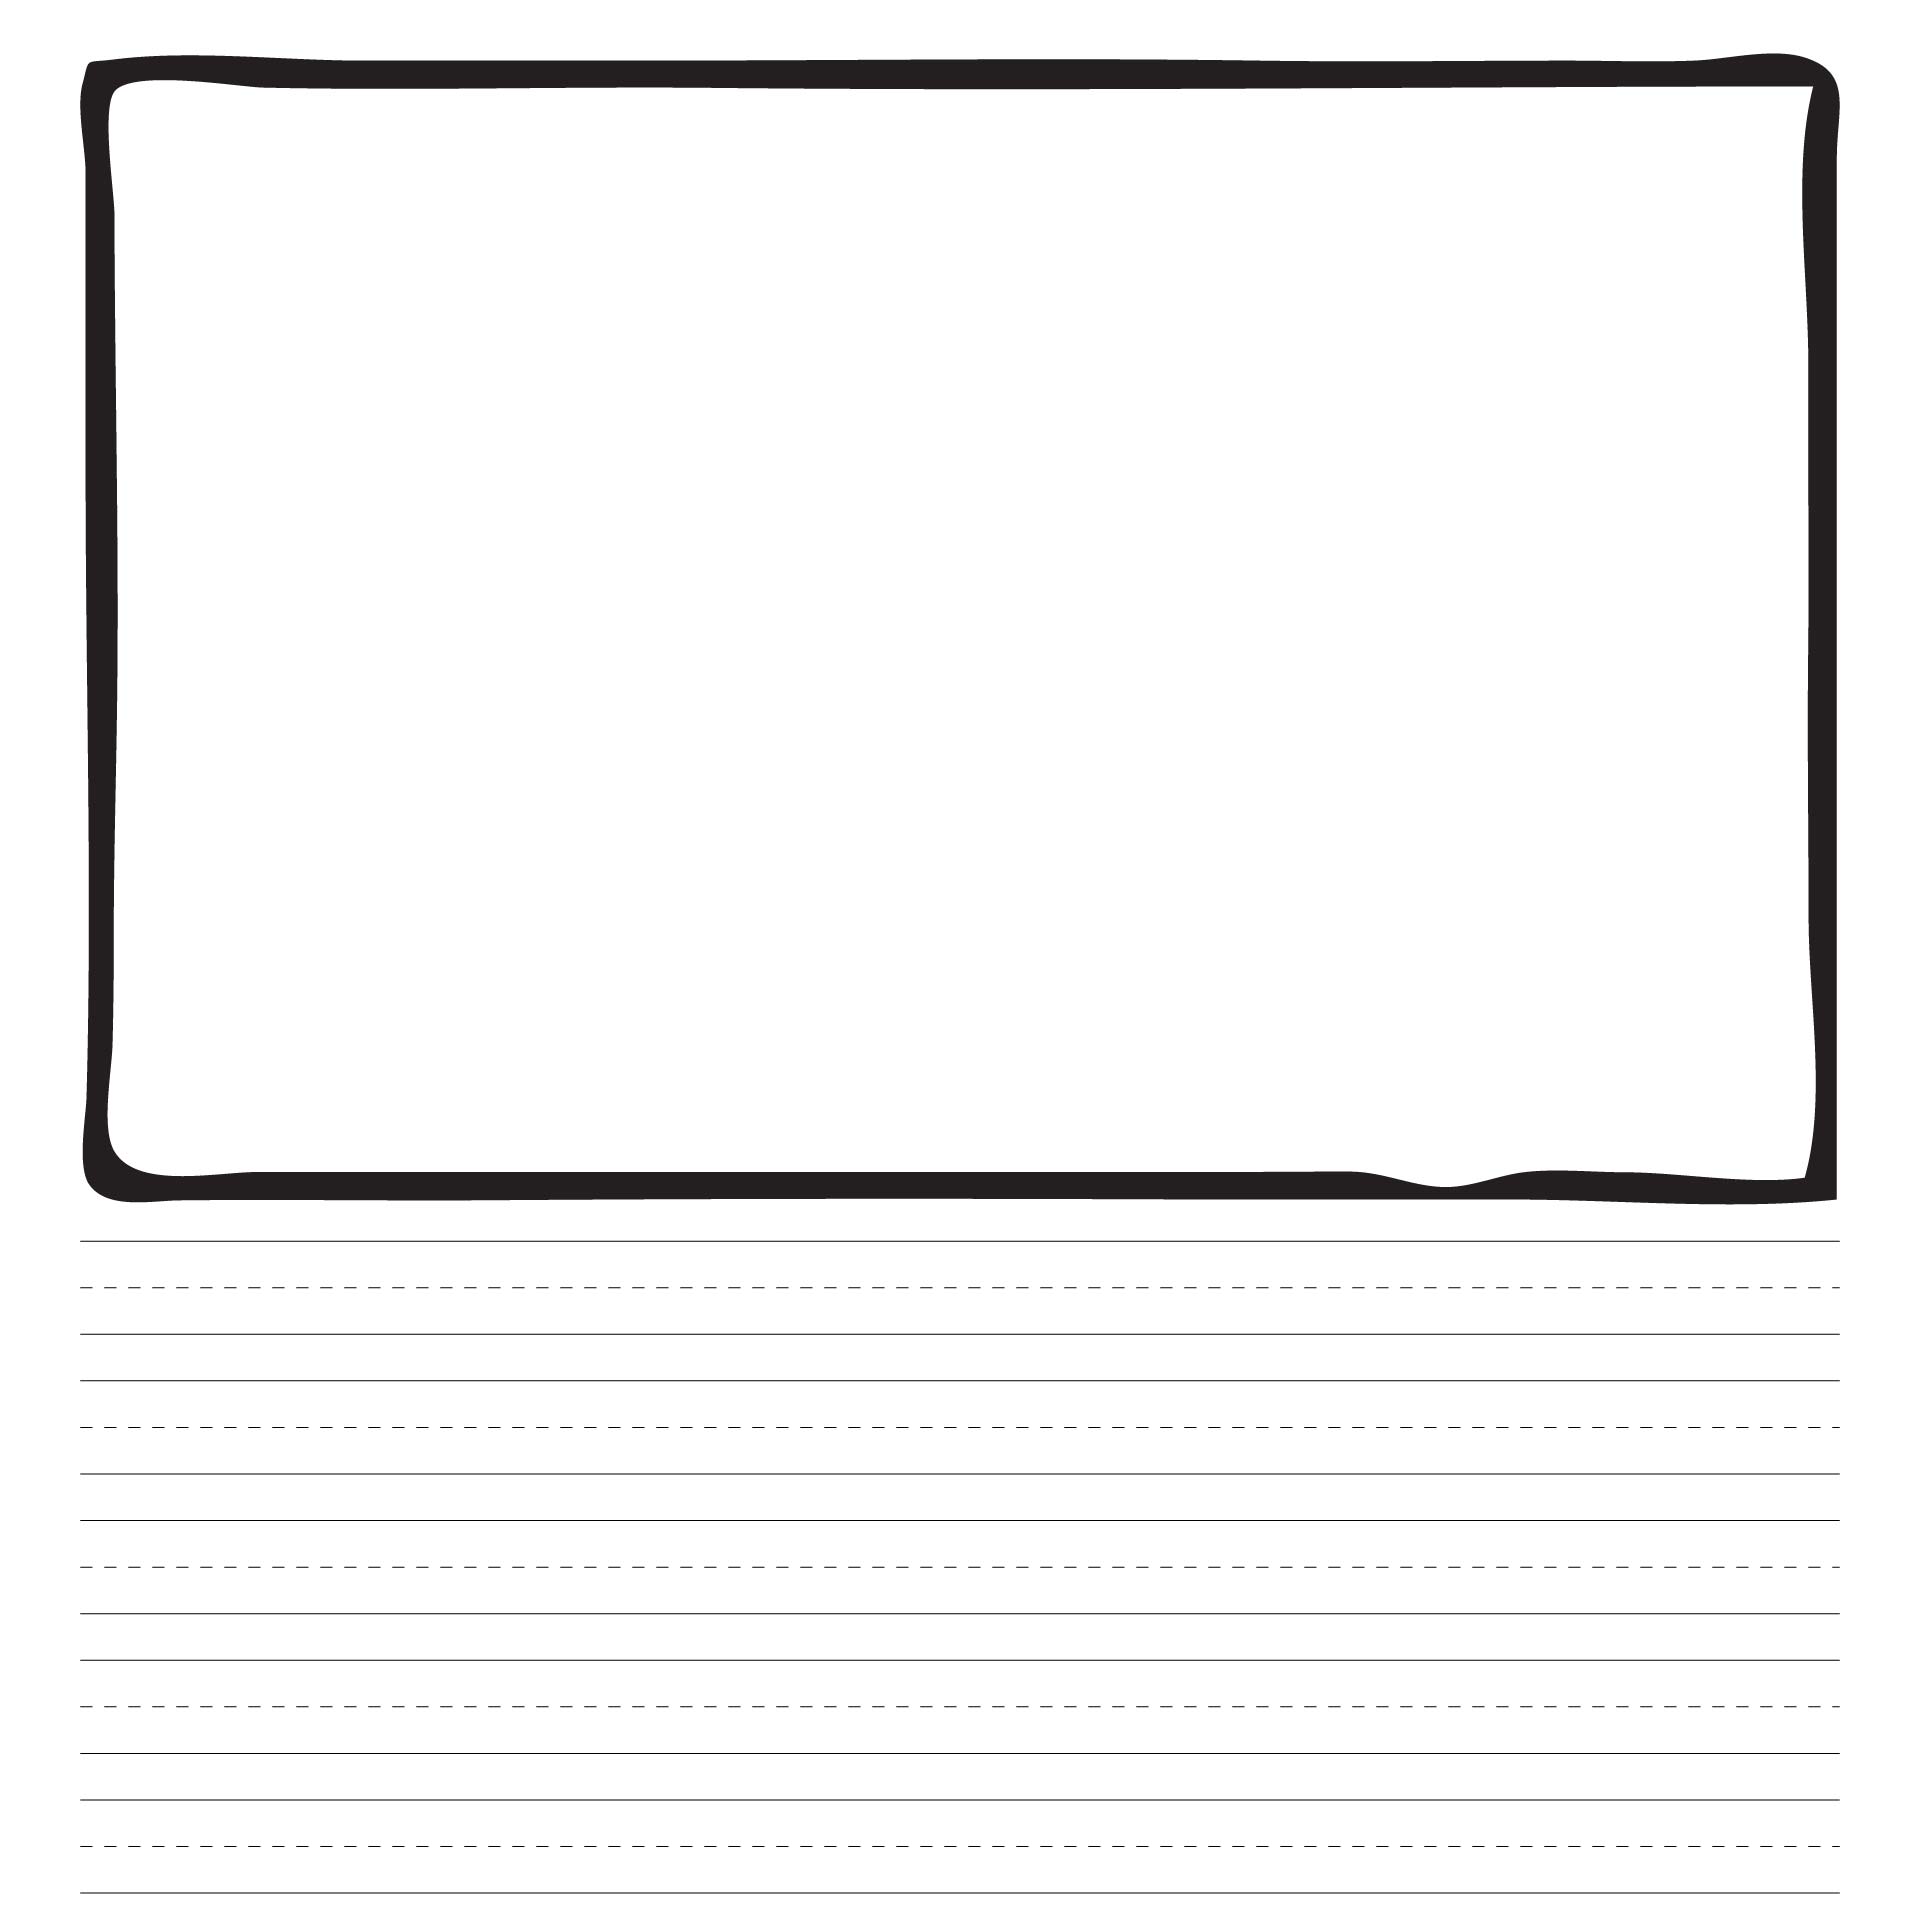 8-best-images-of-first-grade-printable-paper-like-printable-first-grade-writing-paper-template